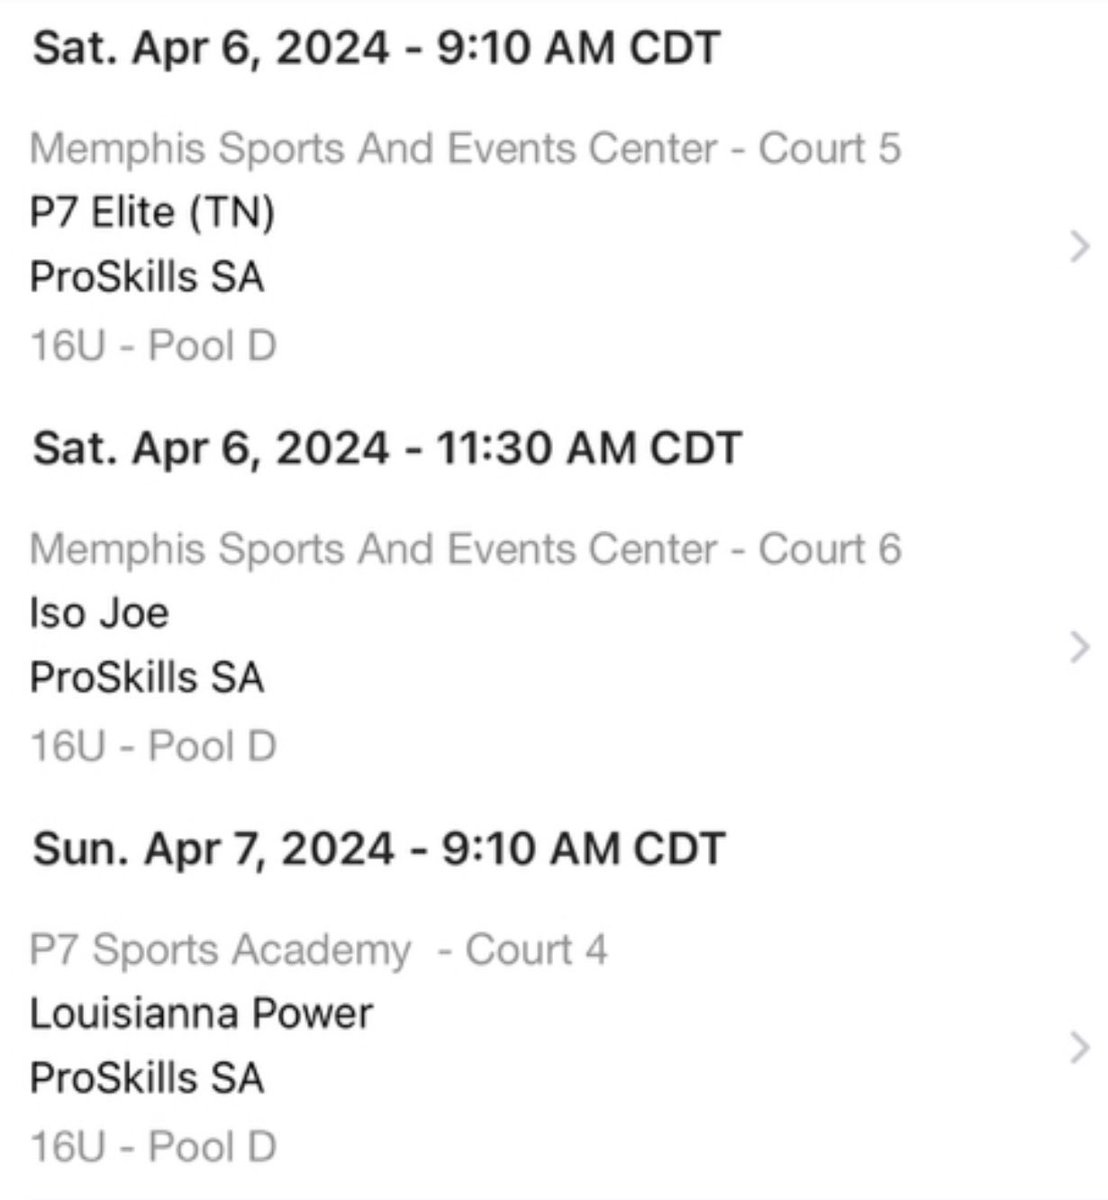 On the road from SATX to Memphis this weekend! 1st @madehoops circuit event of the season! These gentleman are ready to compete! #TheWarmup @Coach__Jernigan @PTMcGrail13 @ZoGoodson @CBUBucsMBk @KevinMoses38 @UOrangemen @LOC_MBB @RhodesLynxMBB @ProSkillsSATX @ProskillsTalley